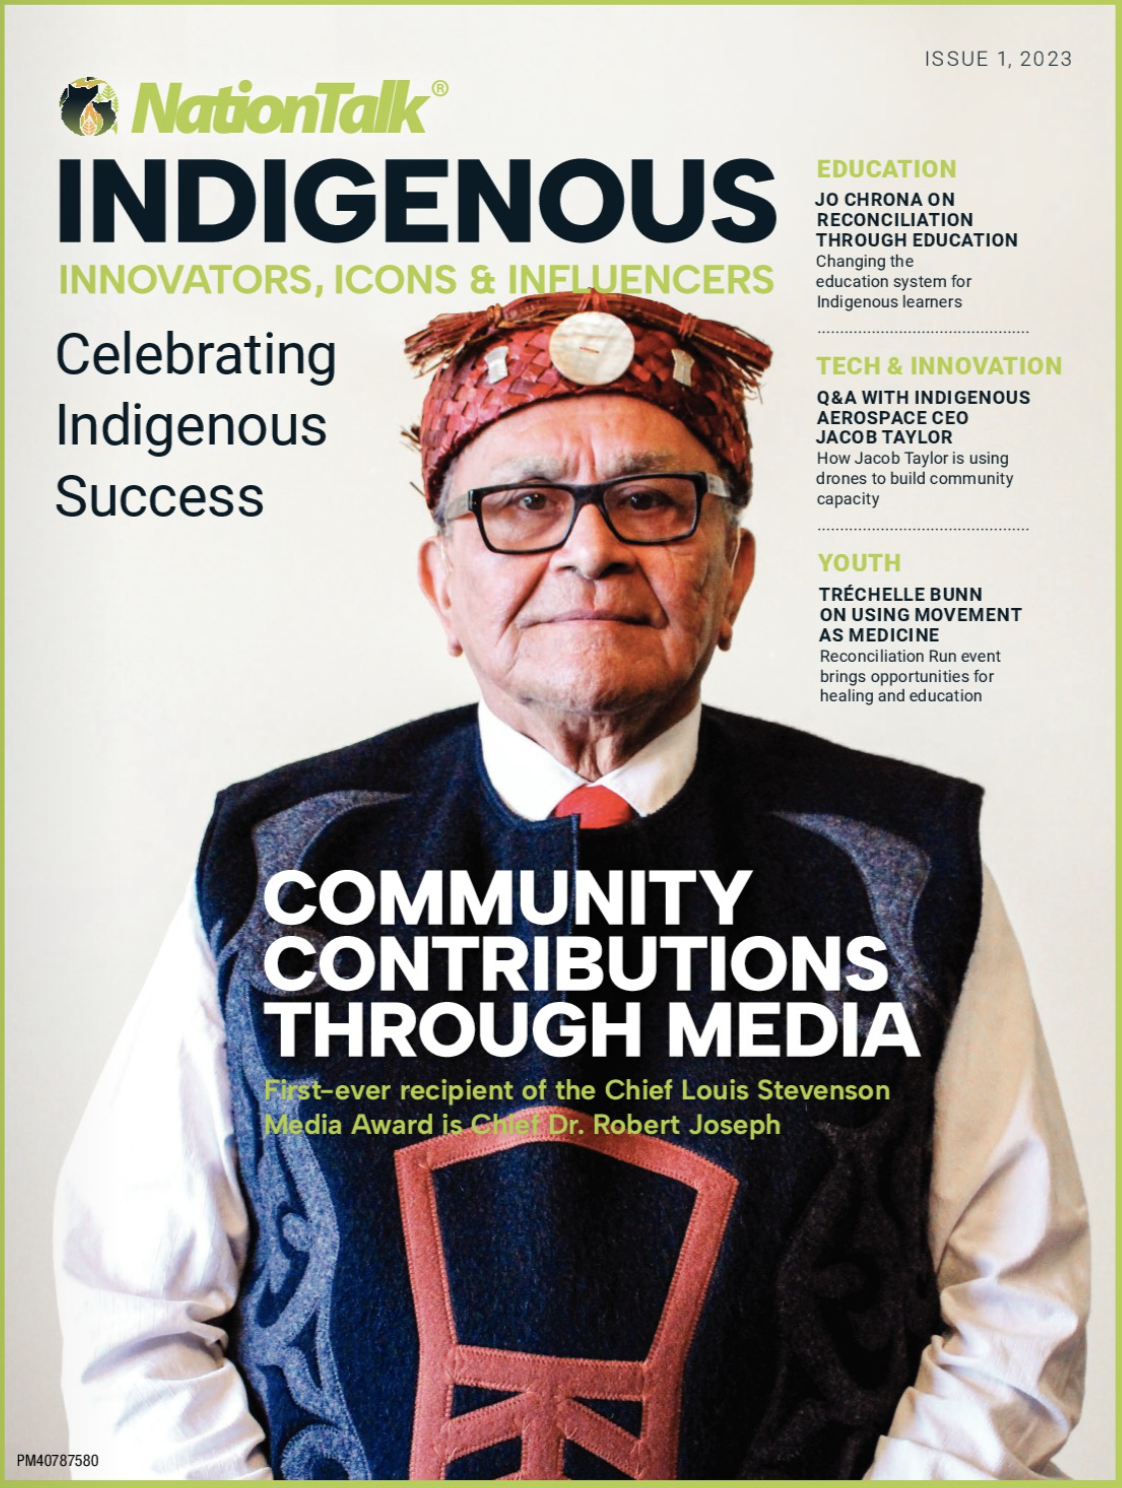 NationTalk's Indigenous Innovators, Icons & Influencers. Photo by Felicia Greekas.